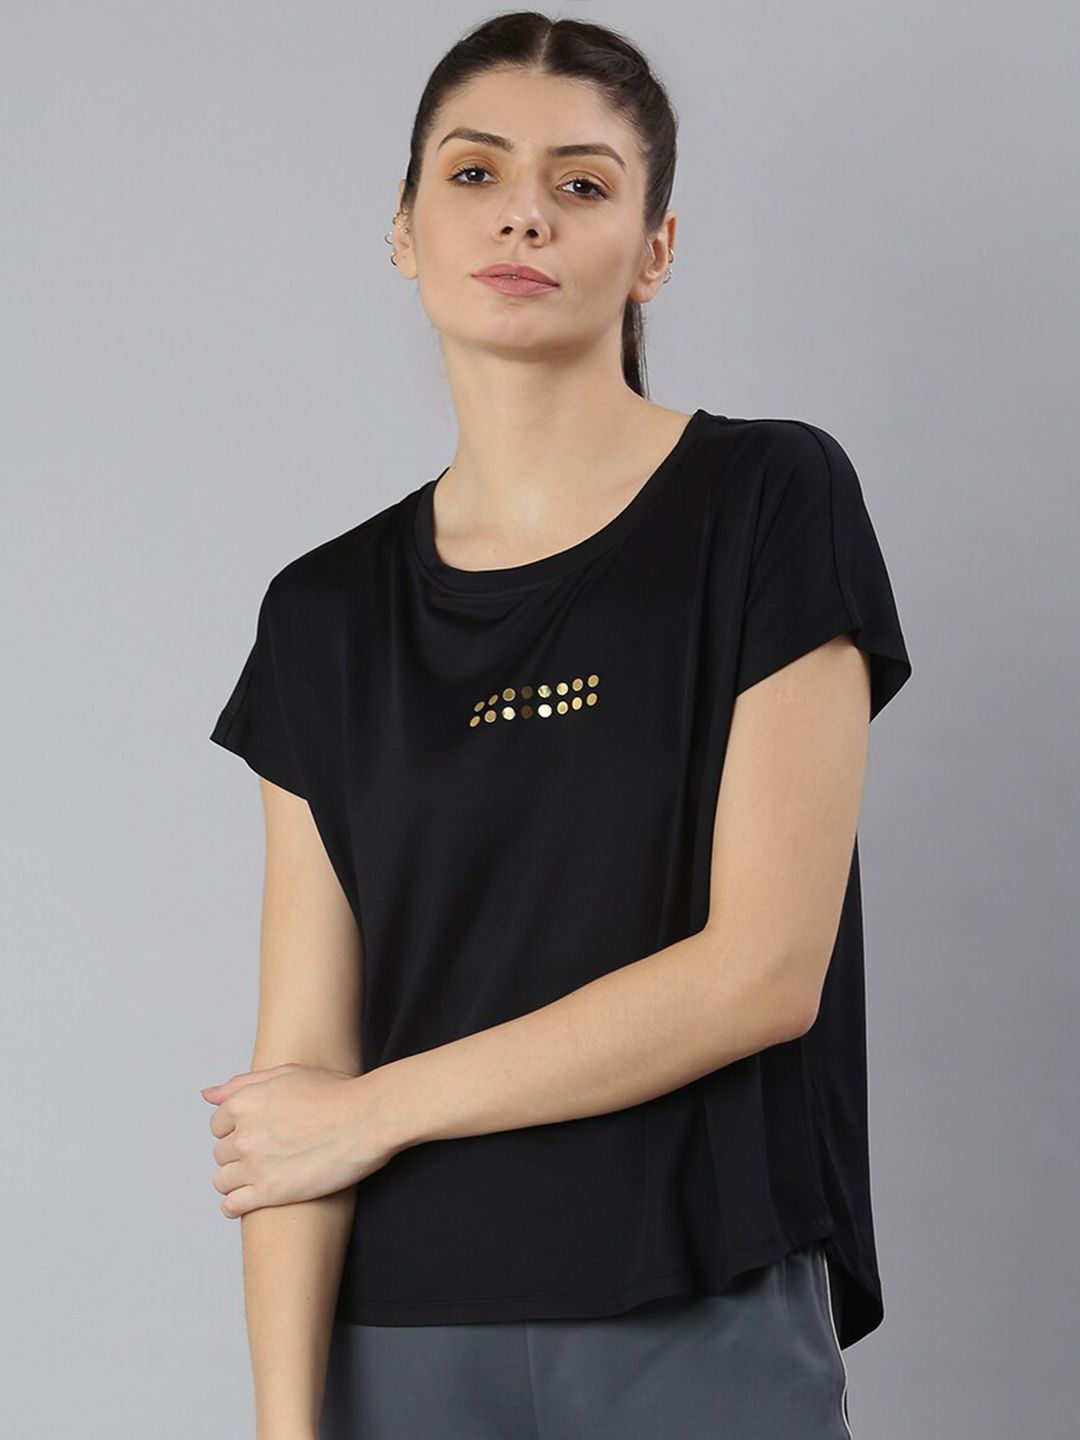 MKH Women Black Printed Extended Sleeves Dri-FIT T-shirt Price in India